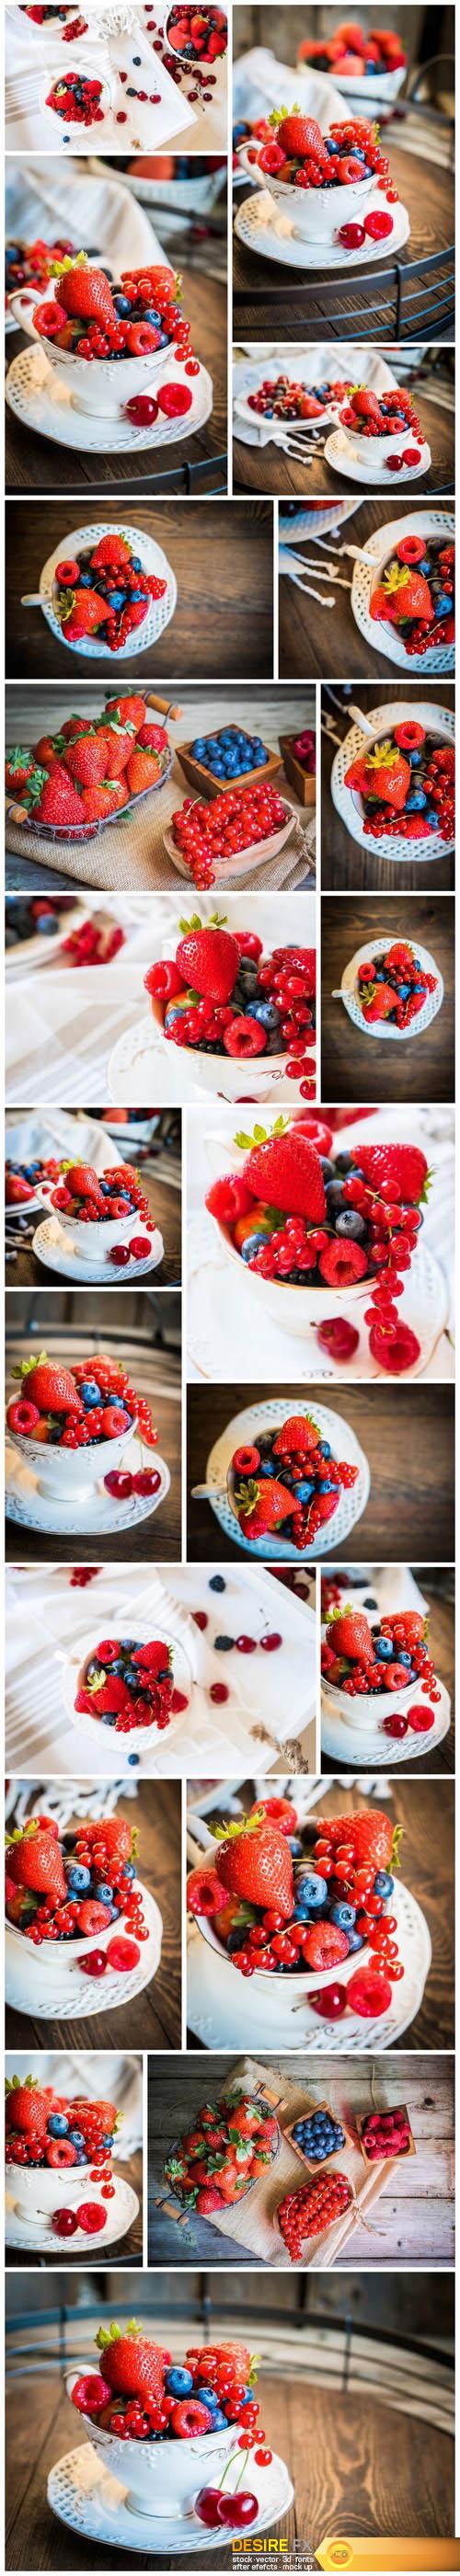 Mix of fresh berries in a cup of tea - 21xUHQ JPEG